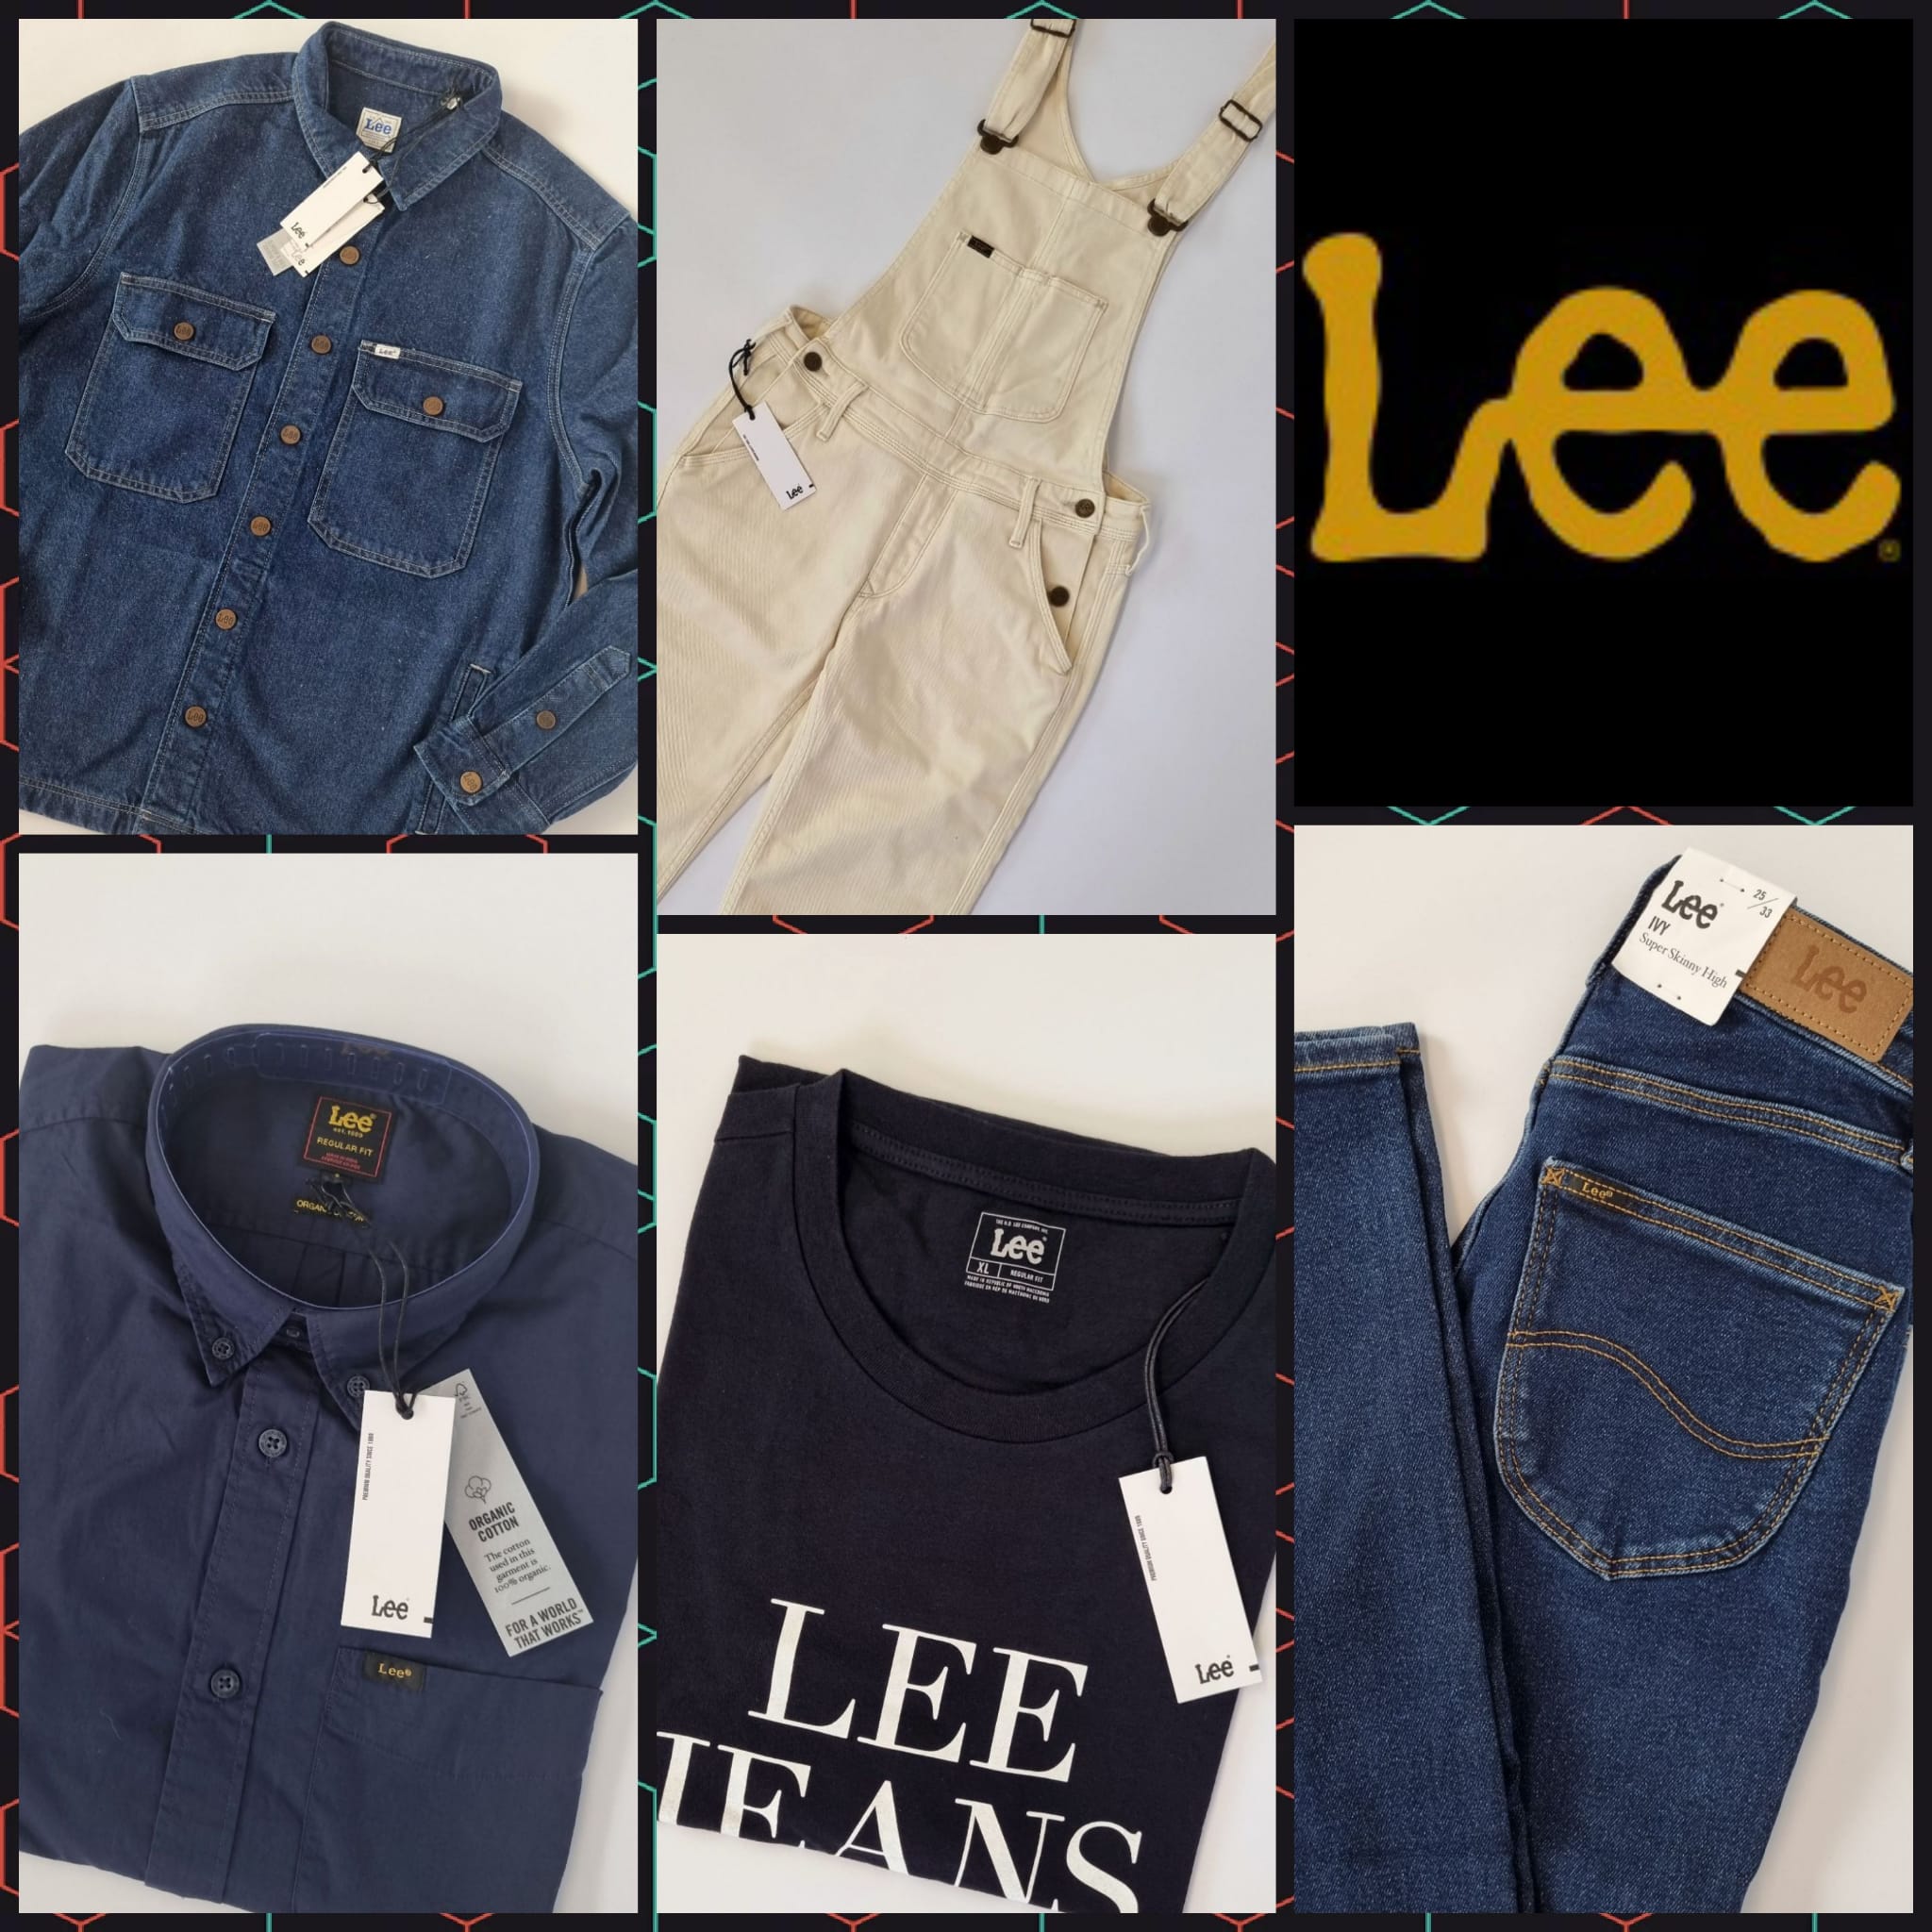 Men's and women's mix by Lee